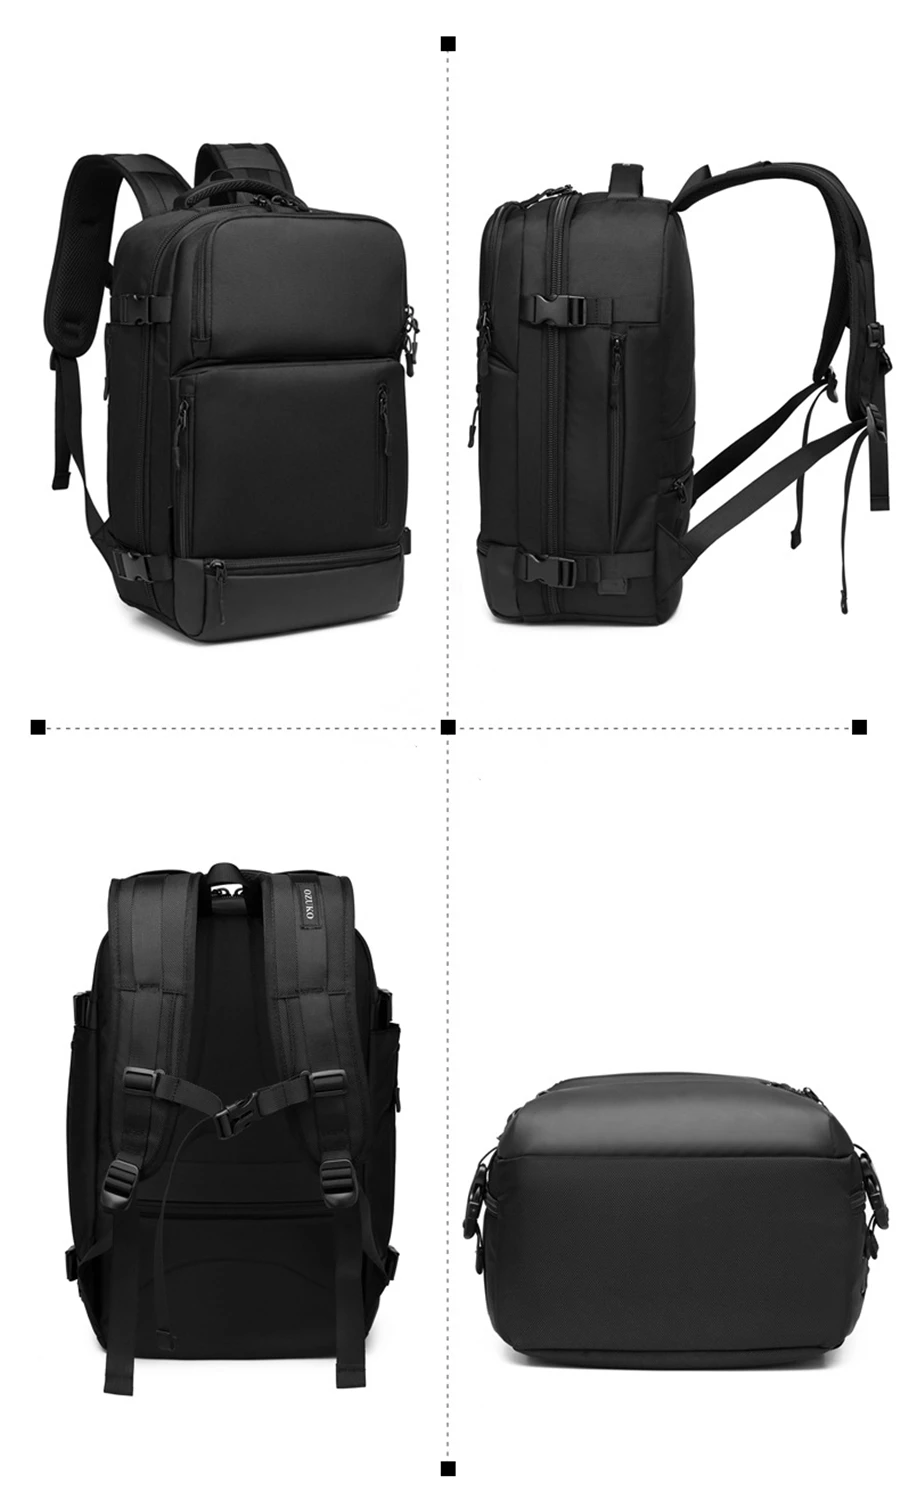 Neouo Business Anti-Theft Travel Laptop Backpack All Angles